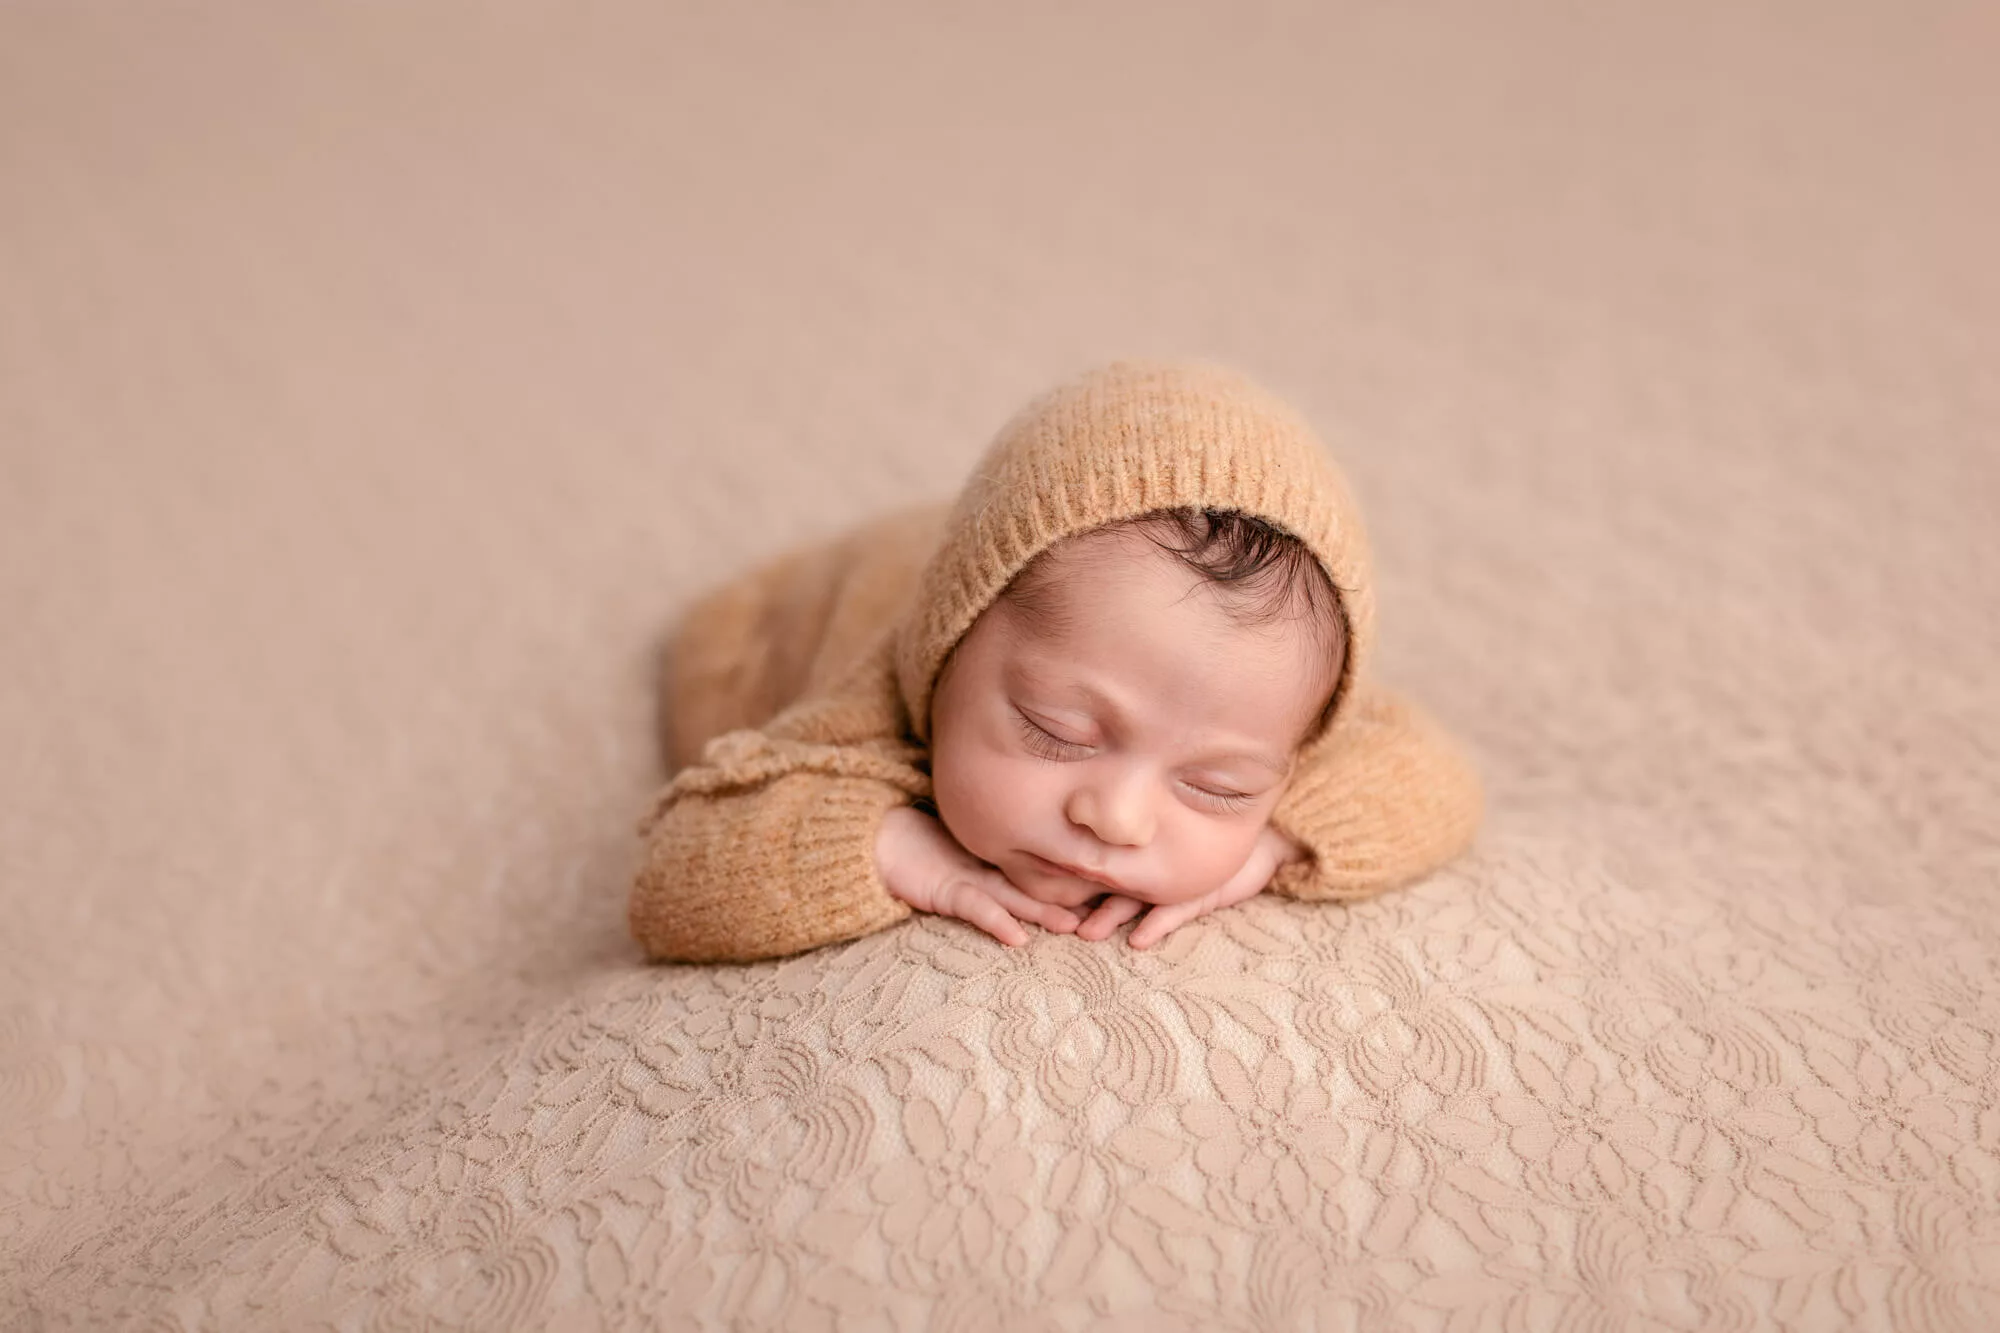 Newborn baby sleeping with heads on hands wearing a caramel colored oufit on a matching background